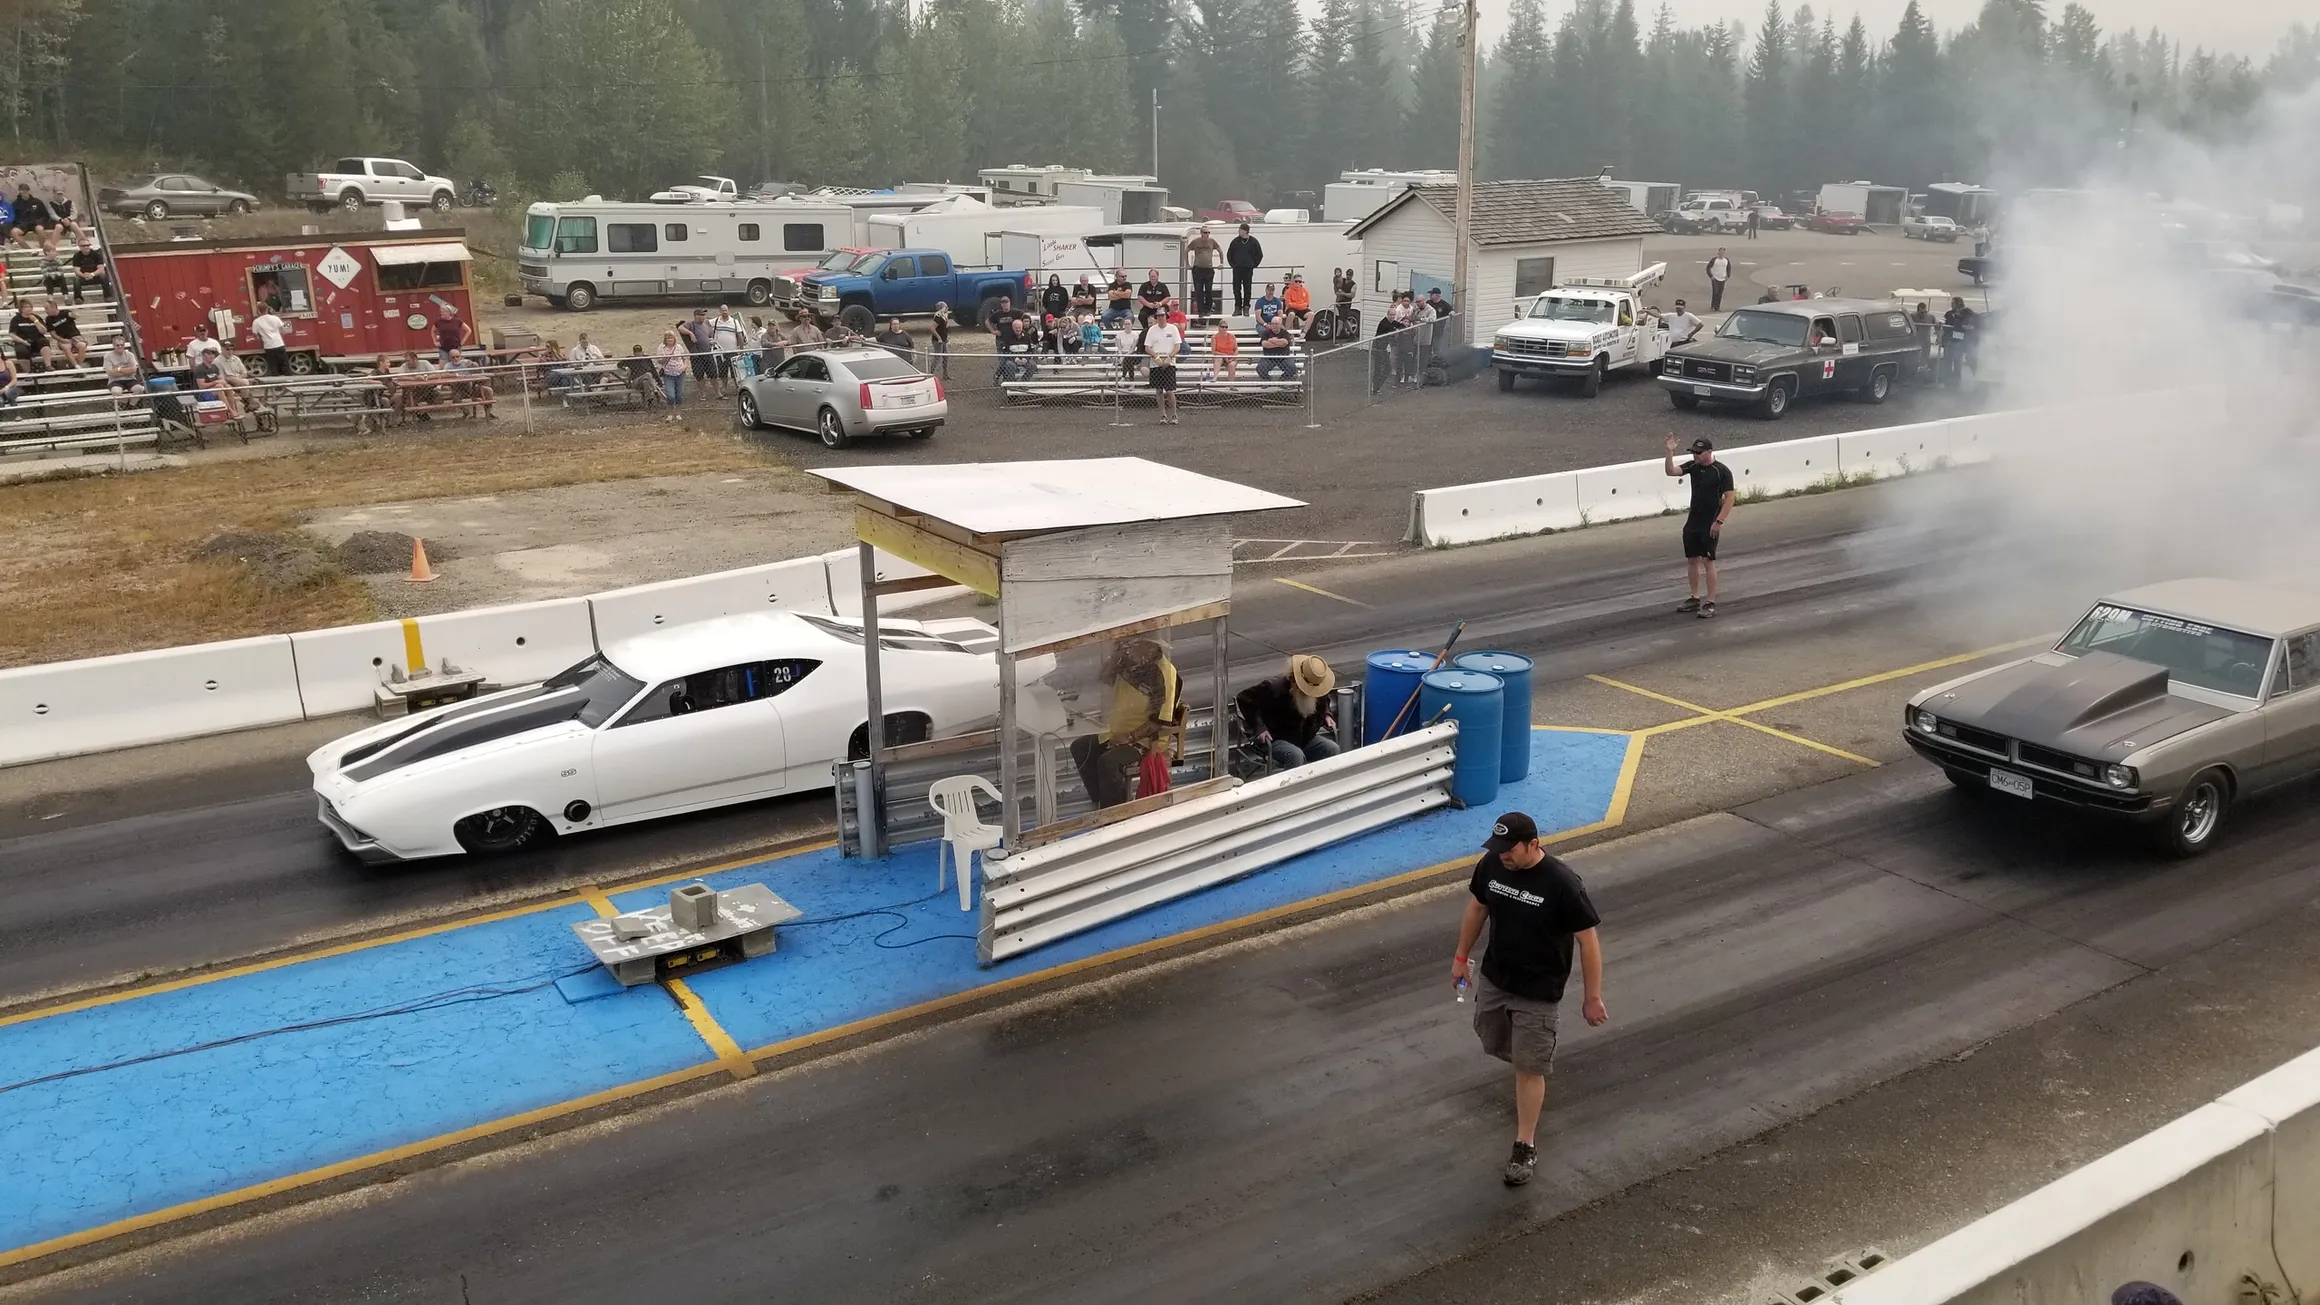 Thunder Mountain Raceway | White and grey cars on track